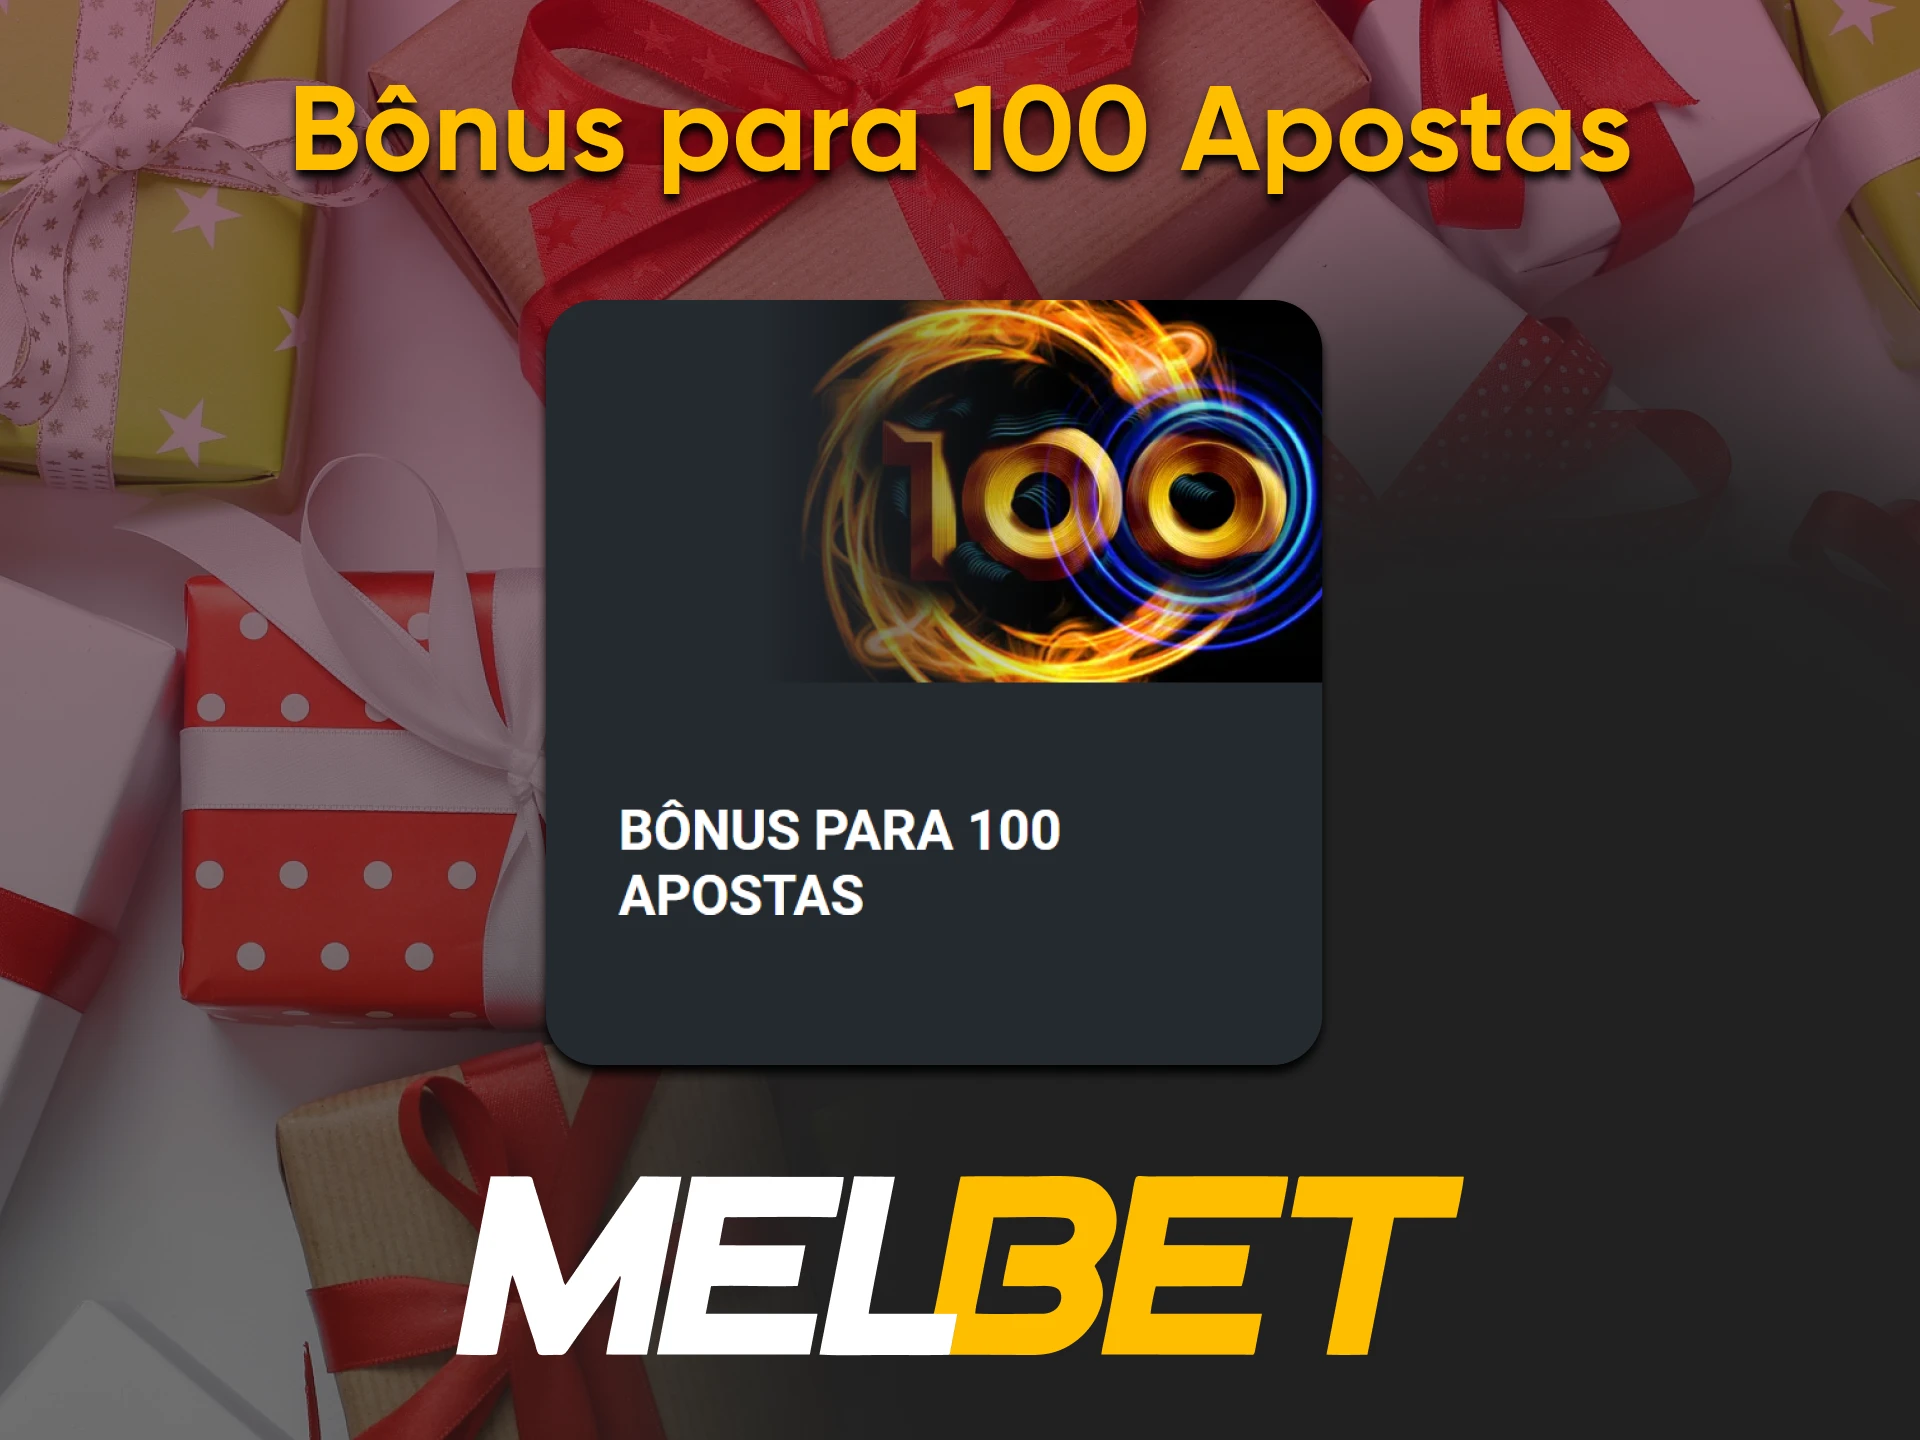 The Melbet website has a bonus for those who place a lot of bets.